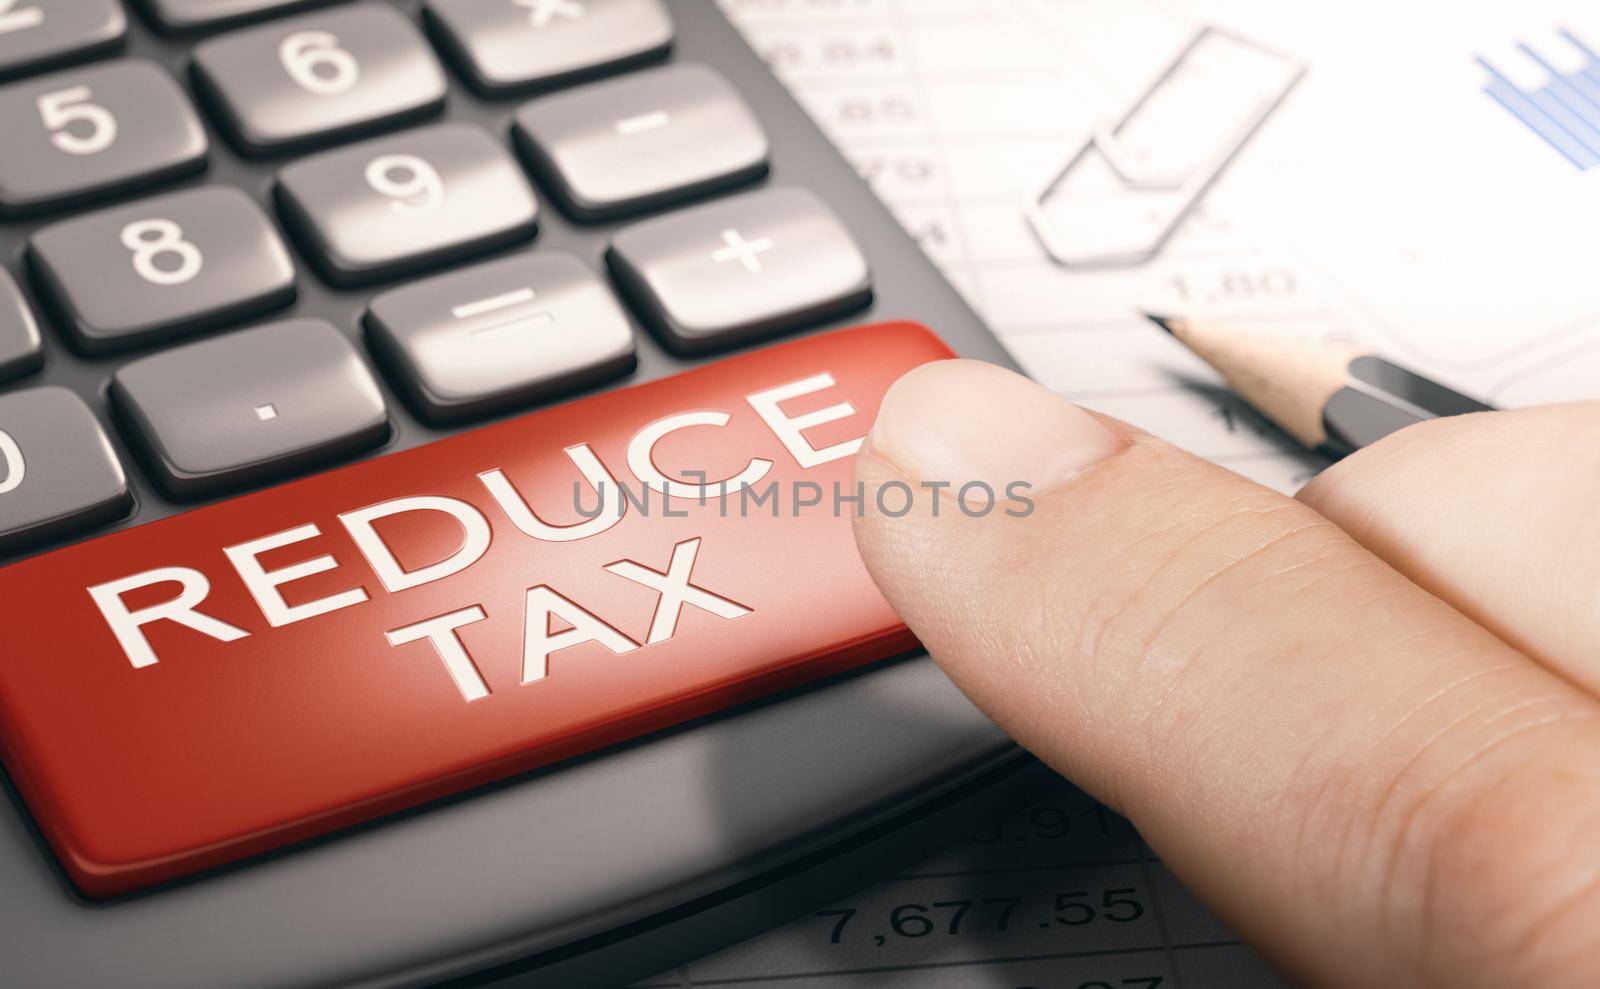 Finger pressing a red button with the text reduce tax. Lowering taxable income. Financial concept. Composite image between a hand photography and a 3D background.